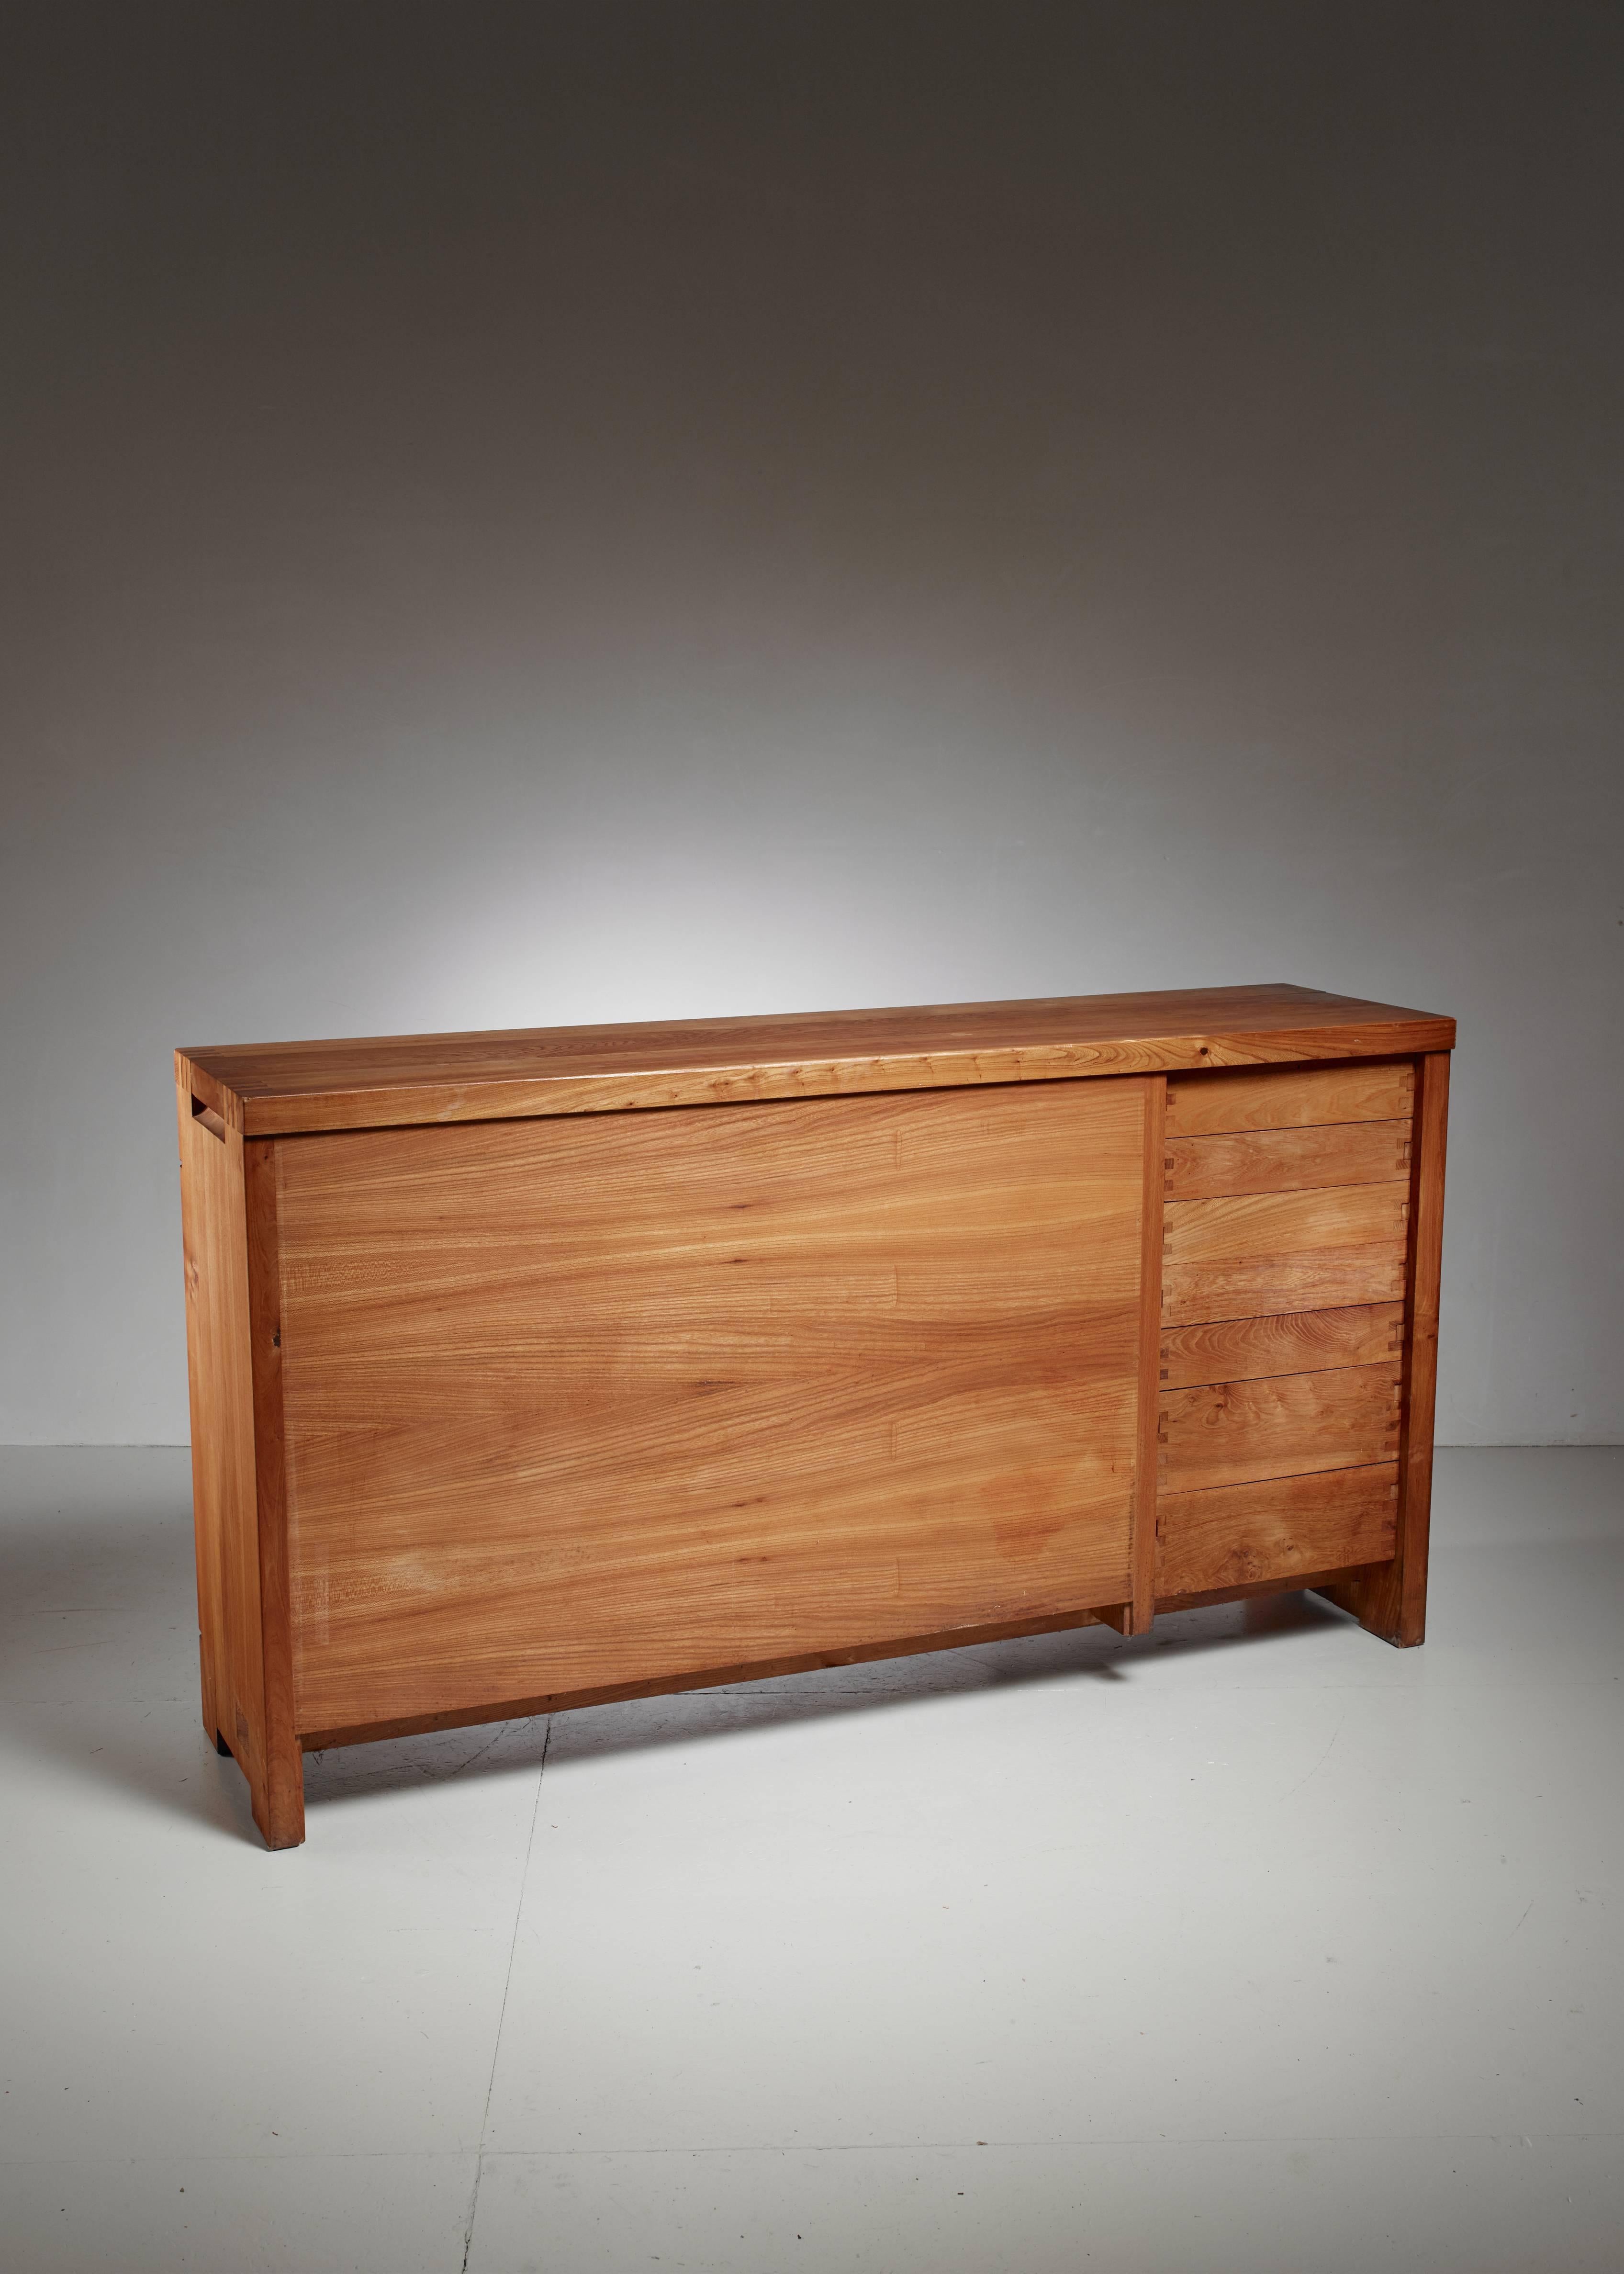 Pierre Chapo Custom-Made Freestanding Sideboard, France, 1960s For Sale 1